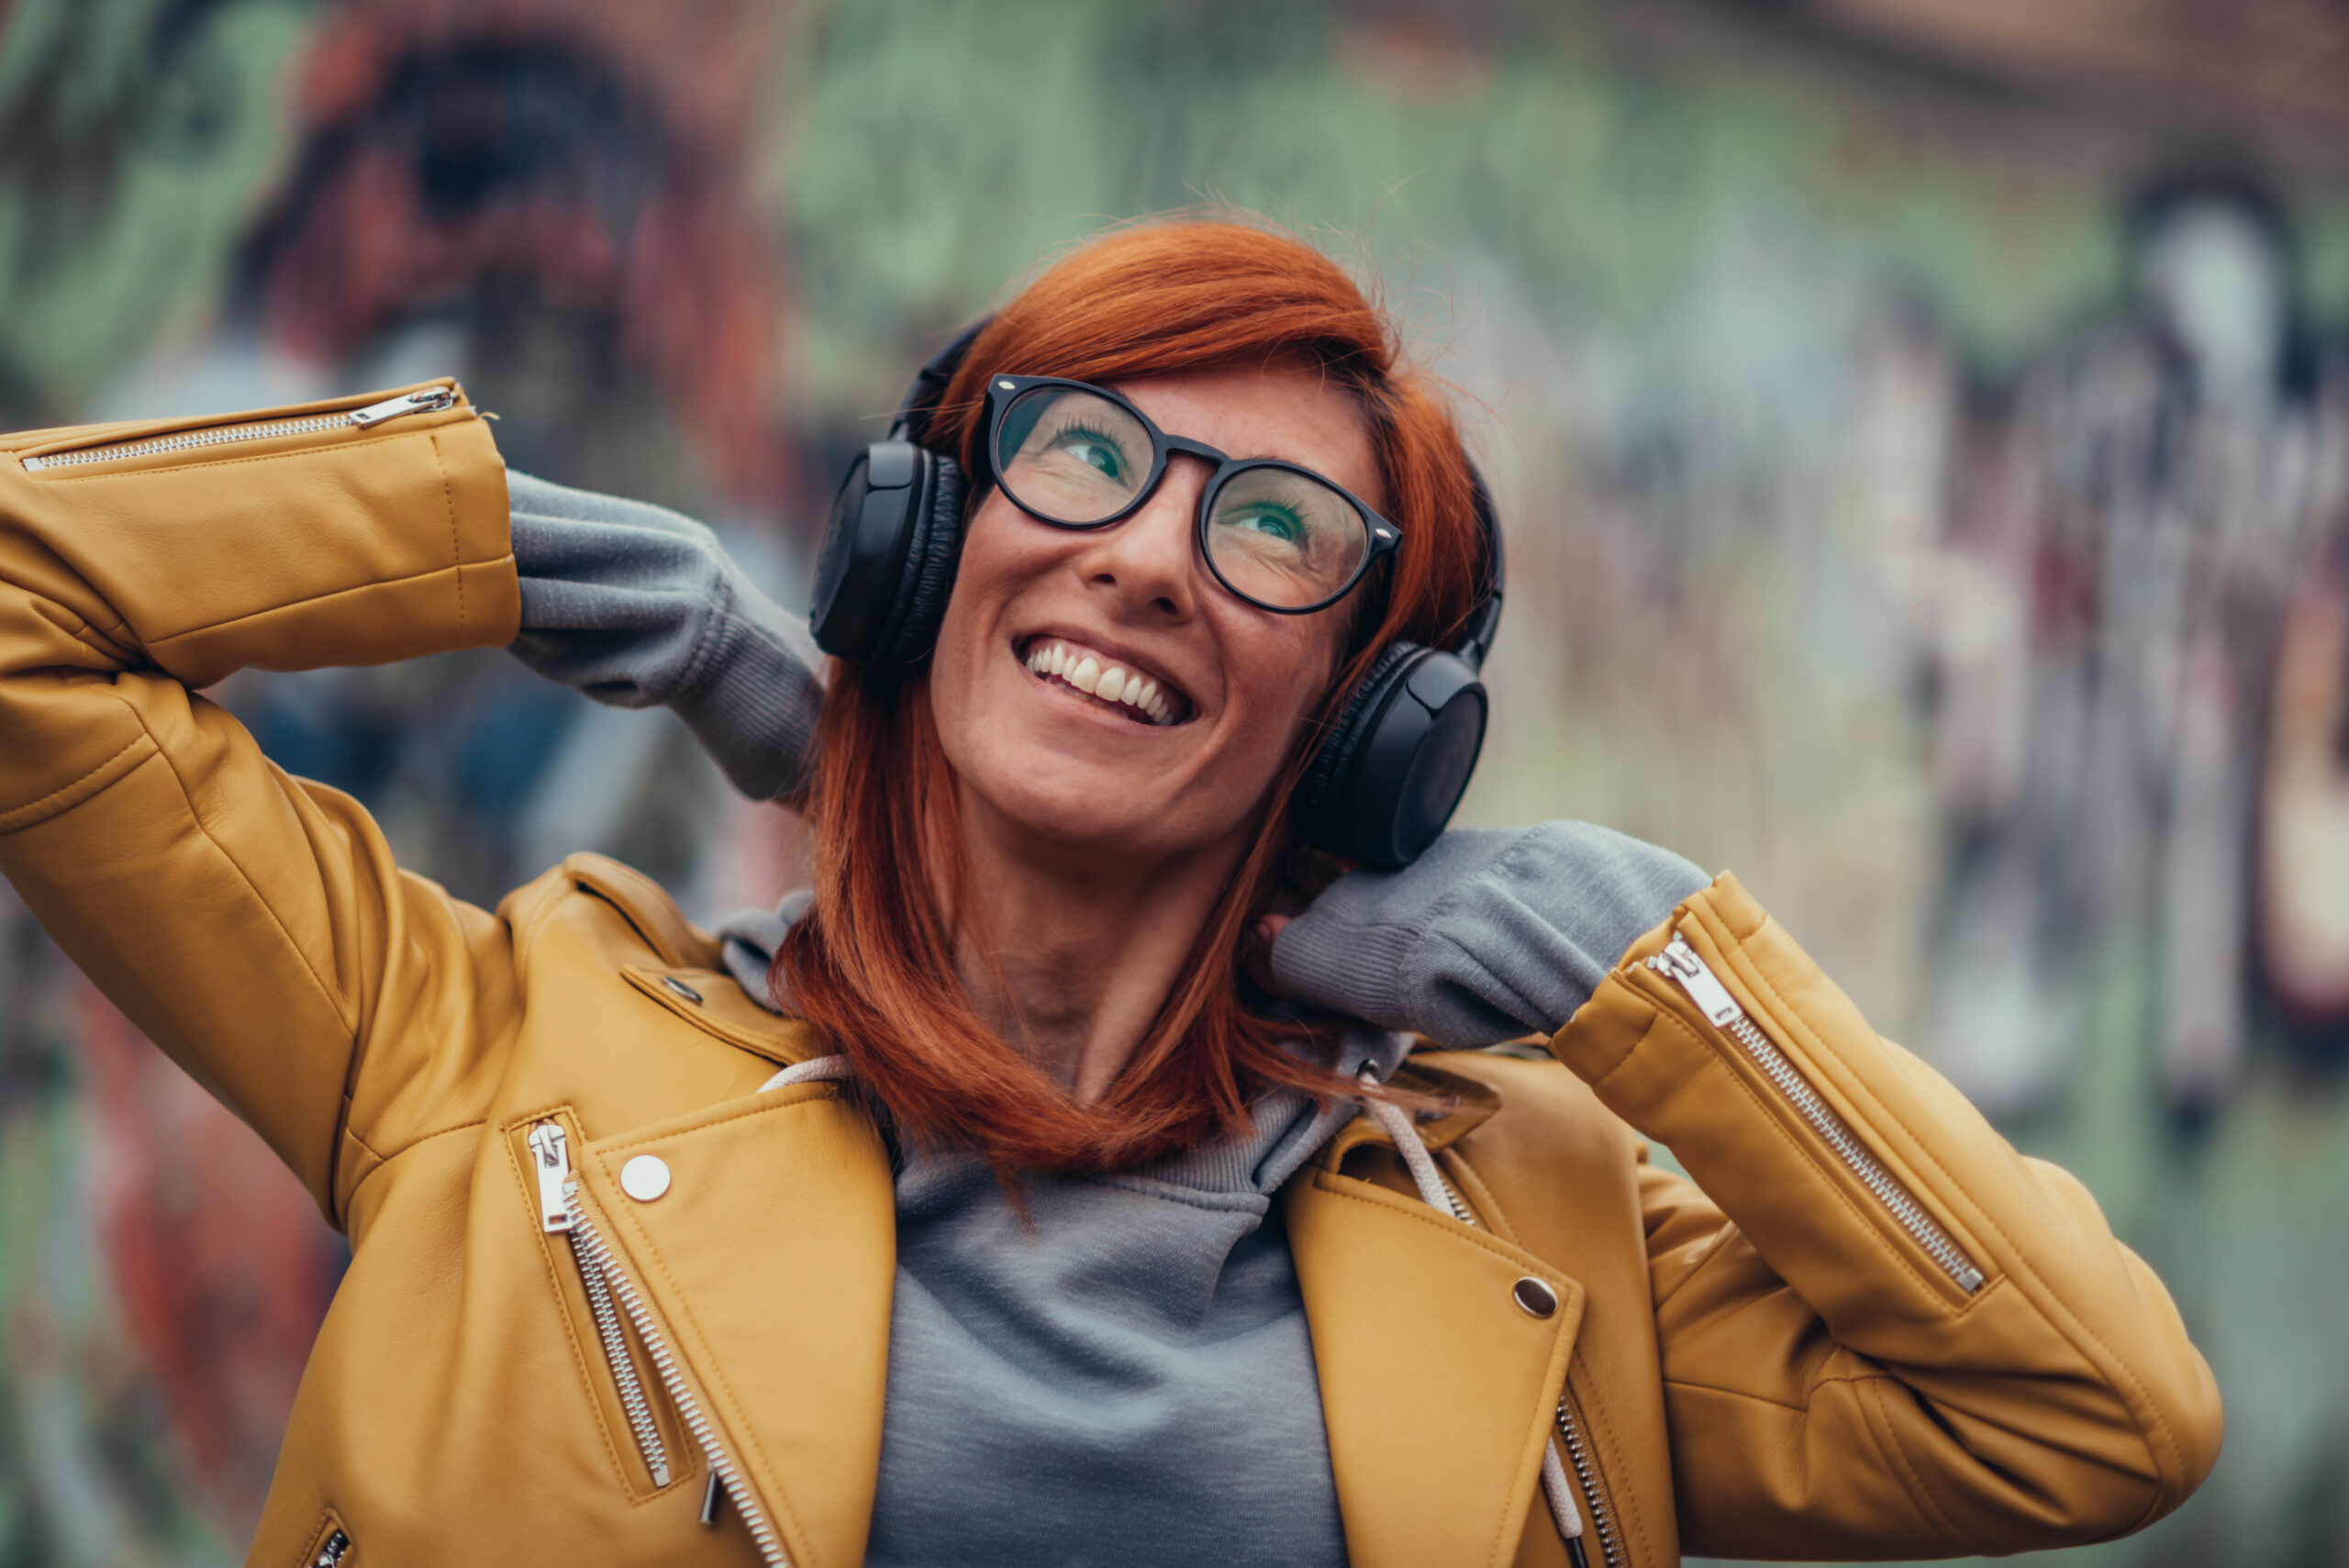 Photo of a woman with red hair and a yellow jacket, wearing headphones and smiling while covering her ears.